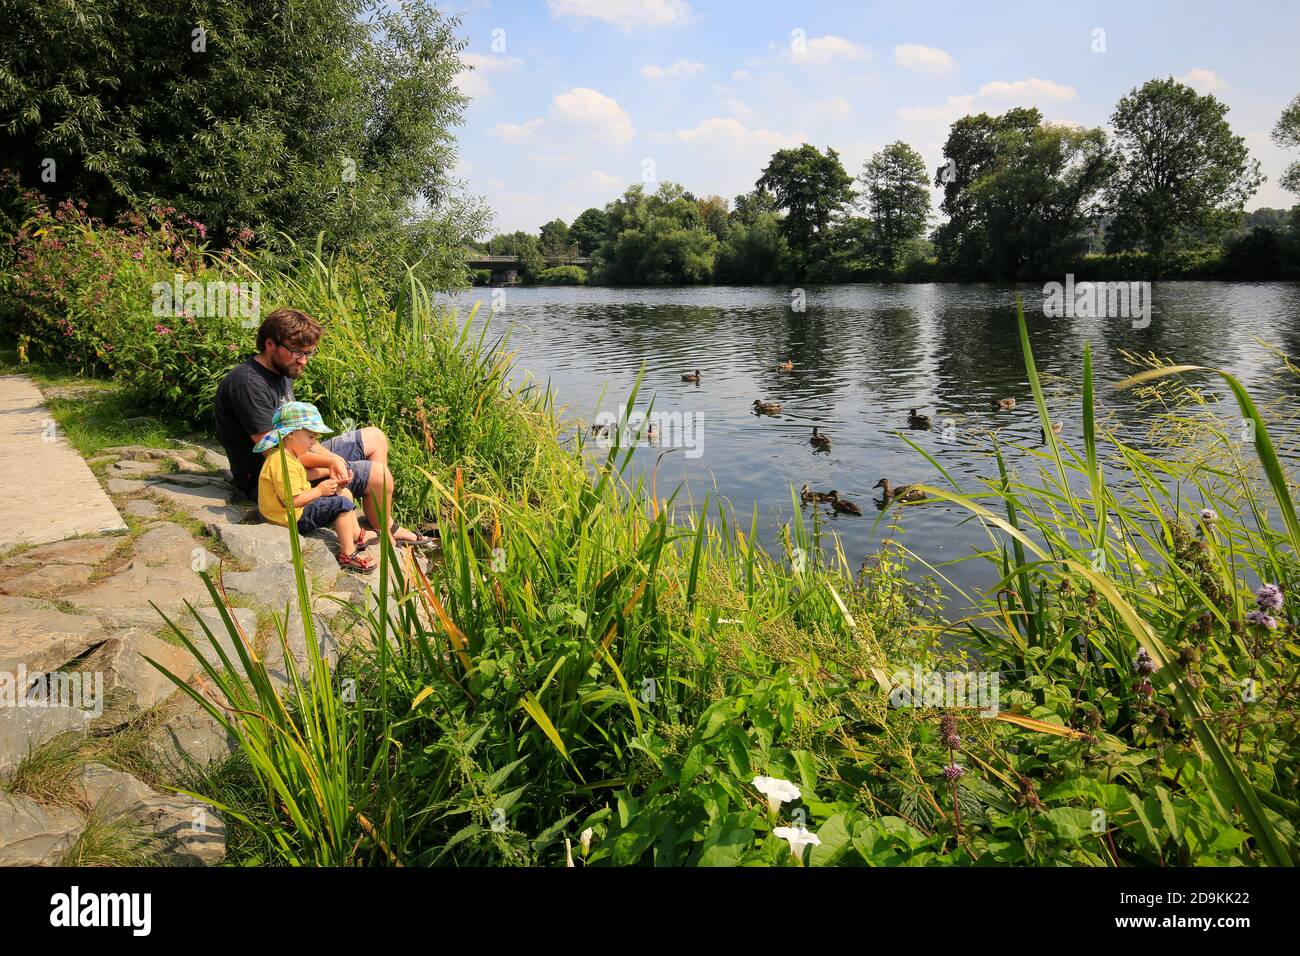 Essen, North Rhine-Westphalia, Ruhr Area, Germany, Ruhr promenade in the Steele district, father and son sit on the Ruhr bank and feed ducks, photographed on the occasion of the Essen 2017 Green Capital of Europe. Stock Photo